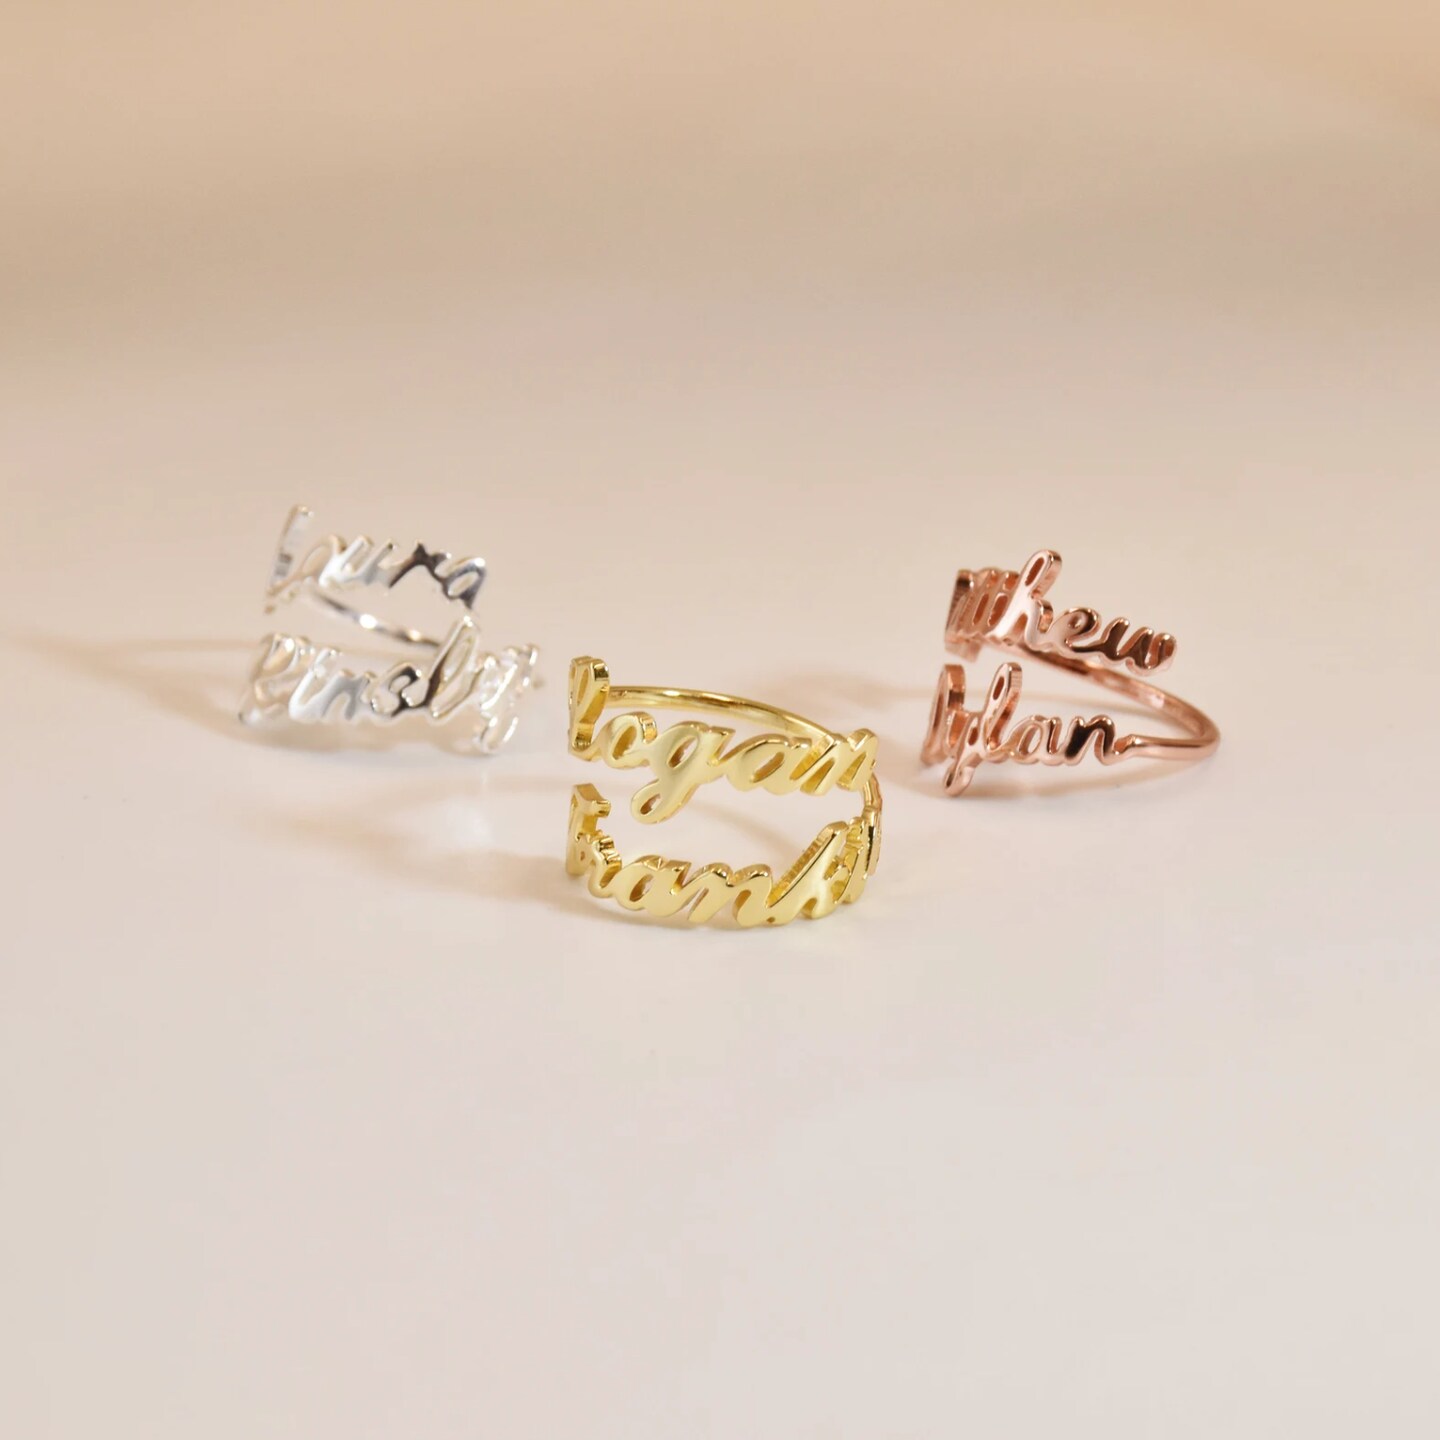 Personalized Couple Name Ring 18K Gold Adjustable Personalized Jewelry  Dainty Name Ring Gift for Her - Etsy